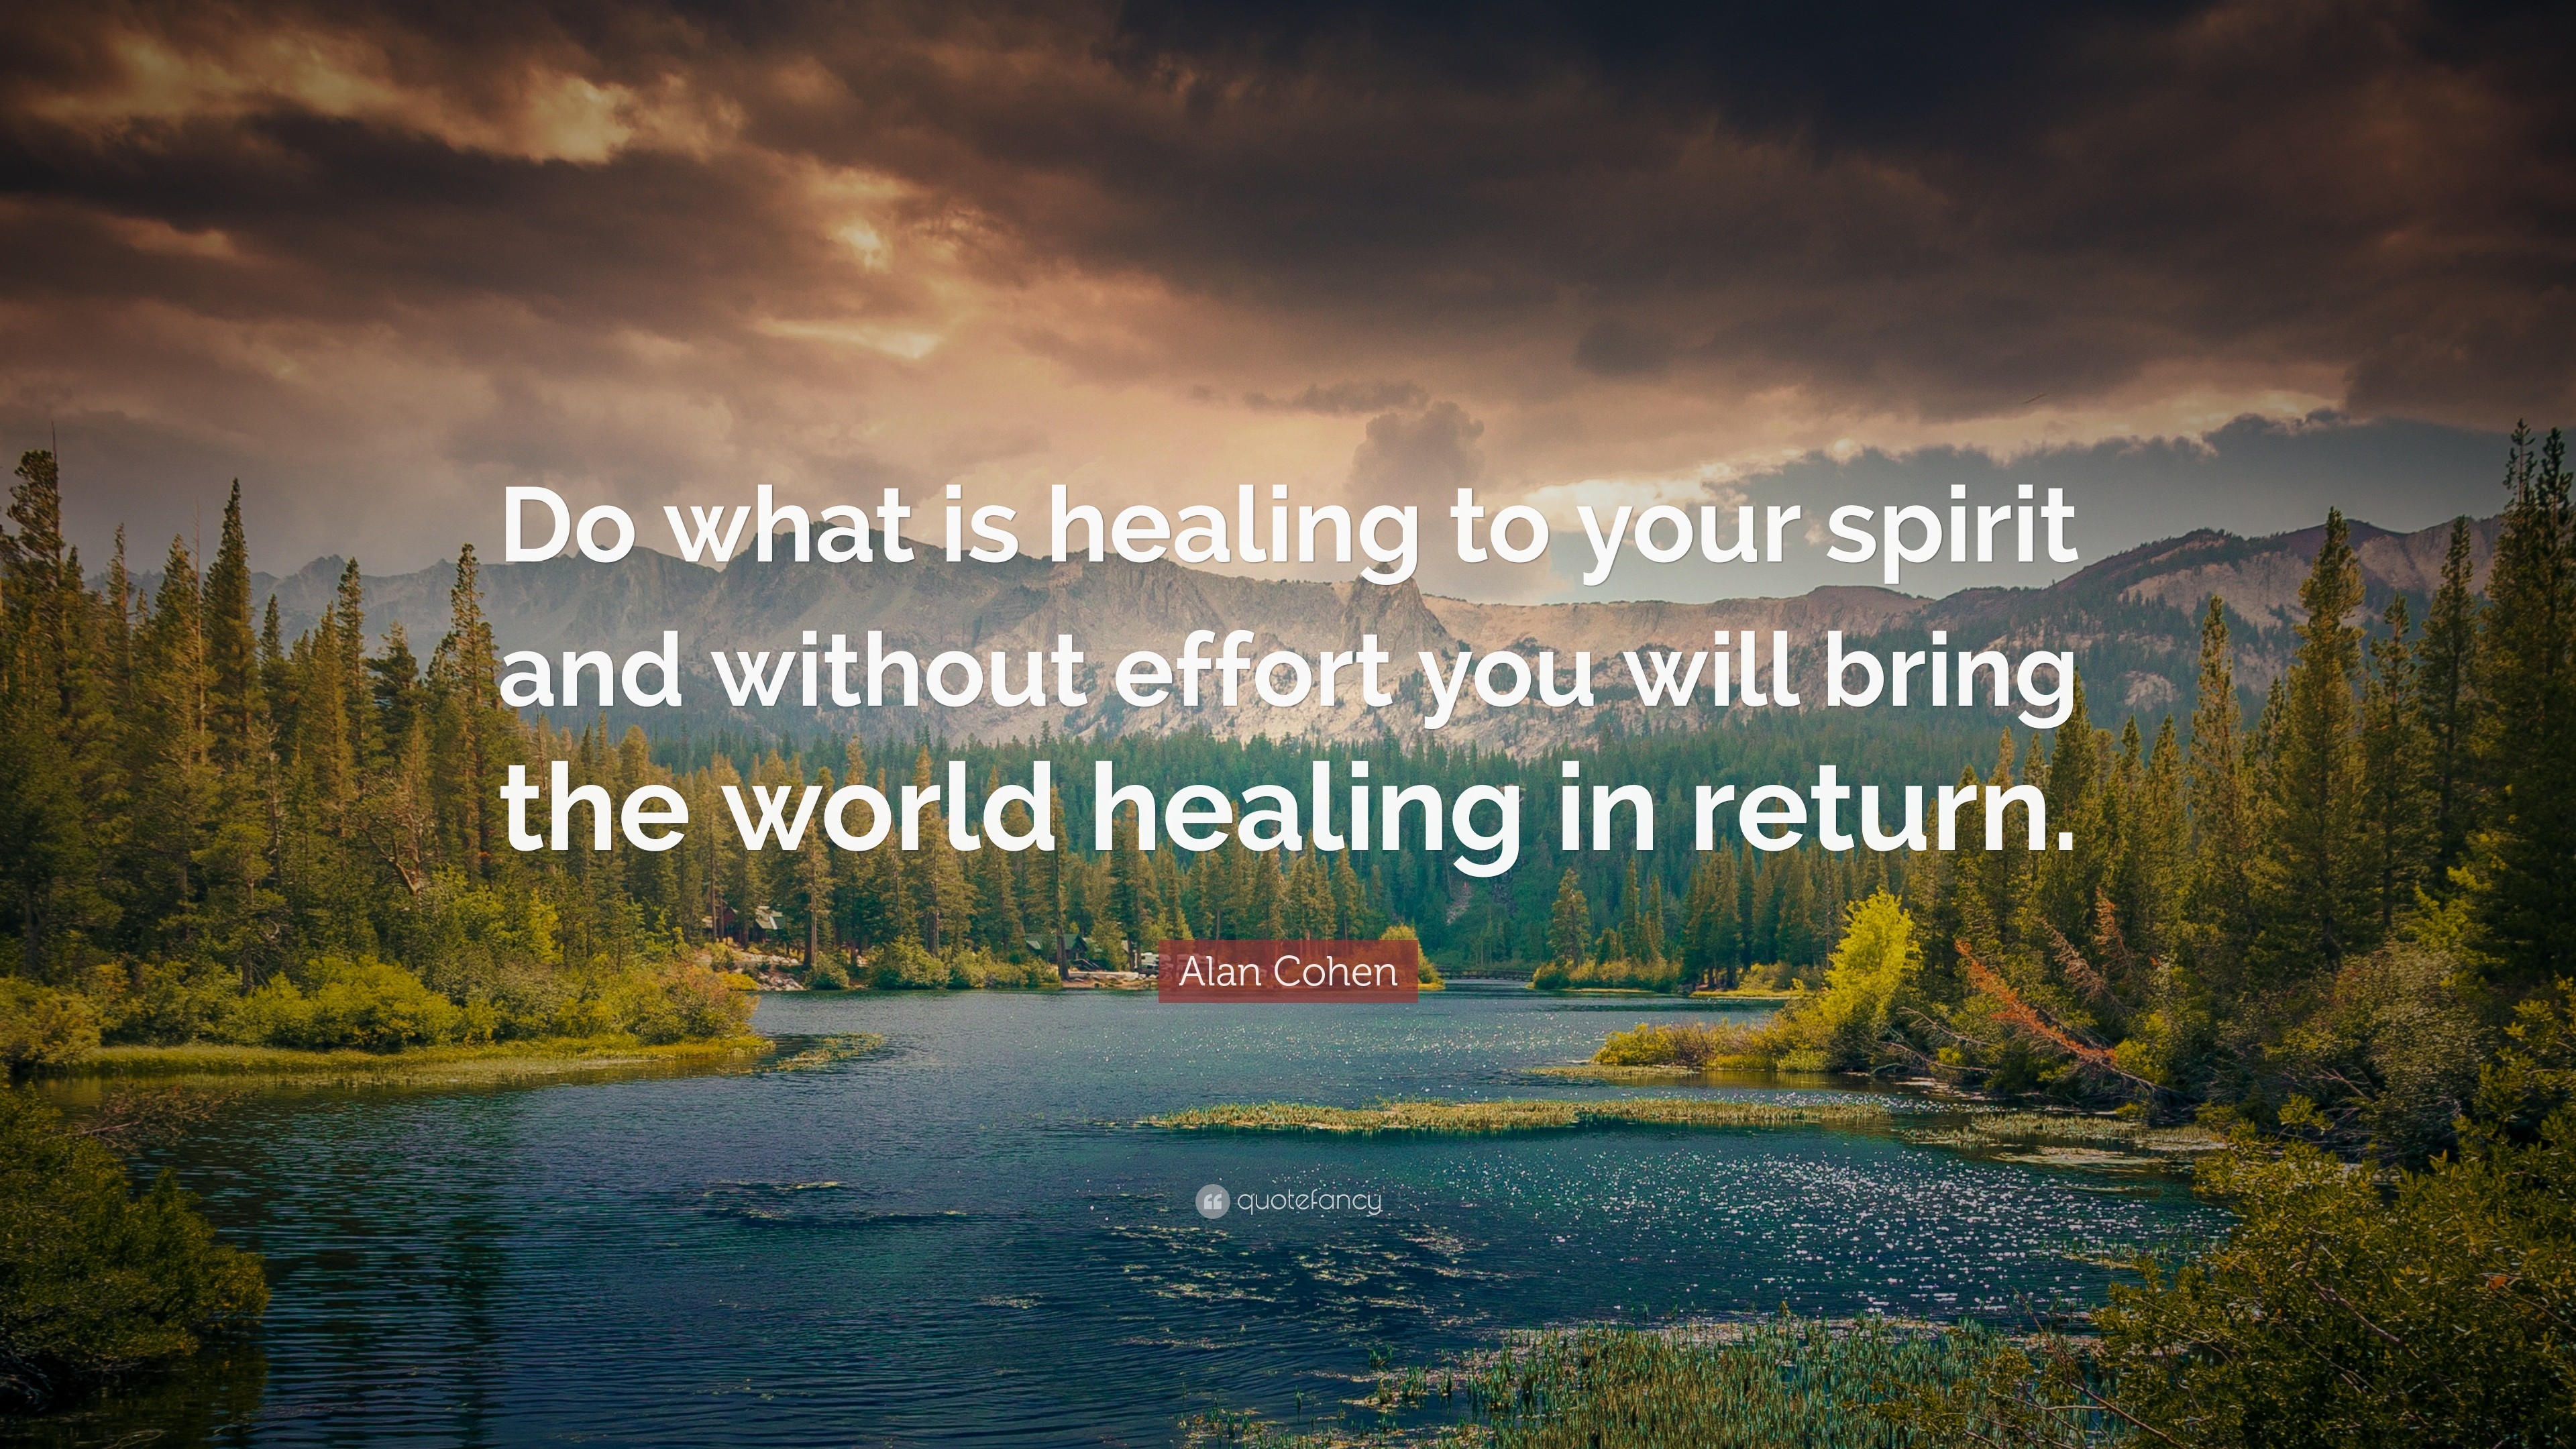 3840x2160 Healing Quotes: “Do what is healing to your spirit and without effort you  will